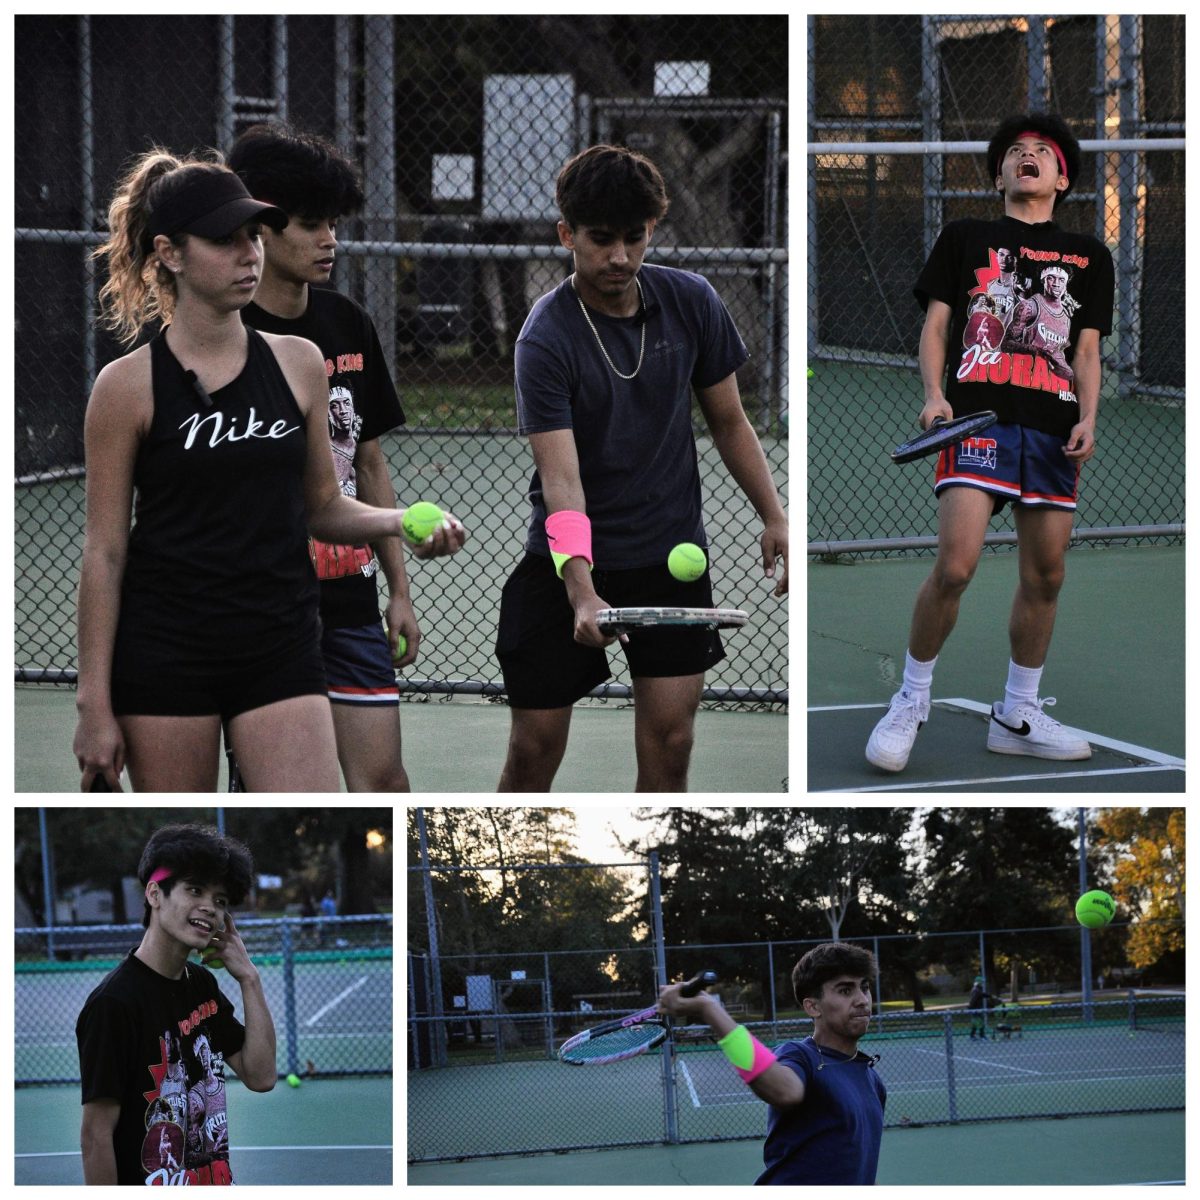 On+the+second+installment+of+Benchwarmers%2C+Luigirey+Guce+25+and+Aiden+Gomez+25+take+on+tennis+so+you+dont+have+to.+Watch+this+video+to+see+the+challenges+and+excitement+that+come+with+this+sport.